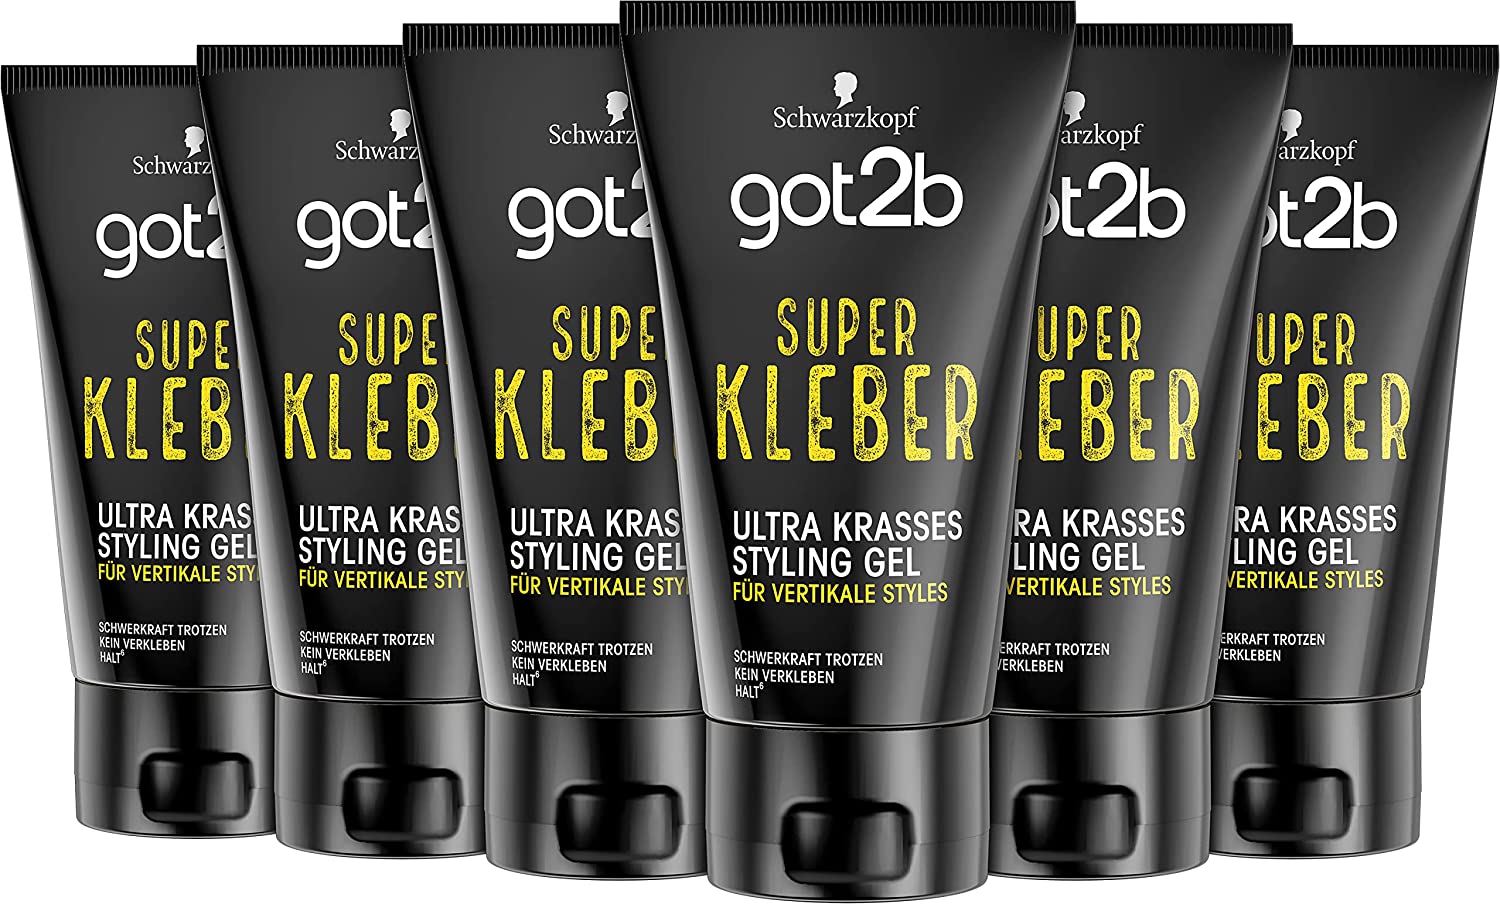 got2b Hair Gel Super Glue Hold 6 (150 ml), Ultra Crass for Vertical Styles, Hair Gel for Gravity Defying Hair Styling until the Next Hair Wash, Does Not Stick